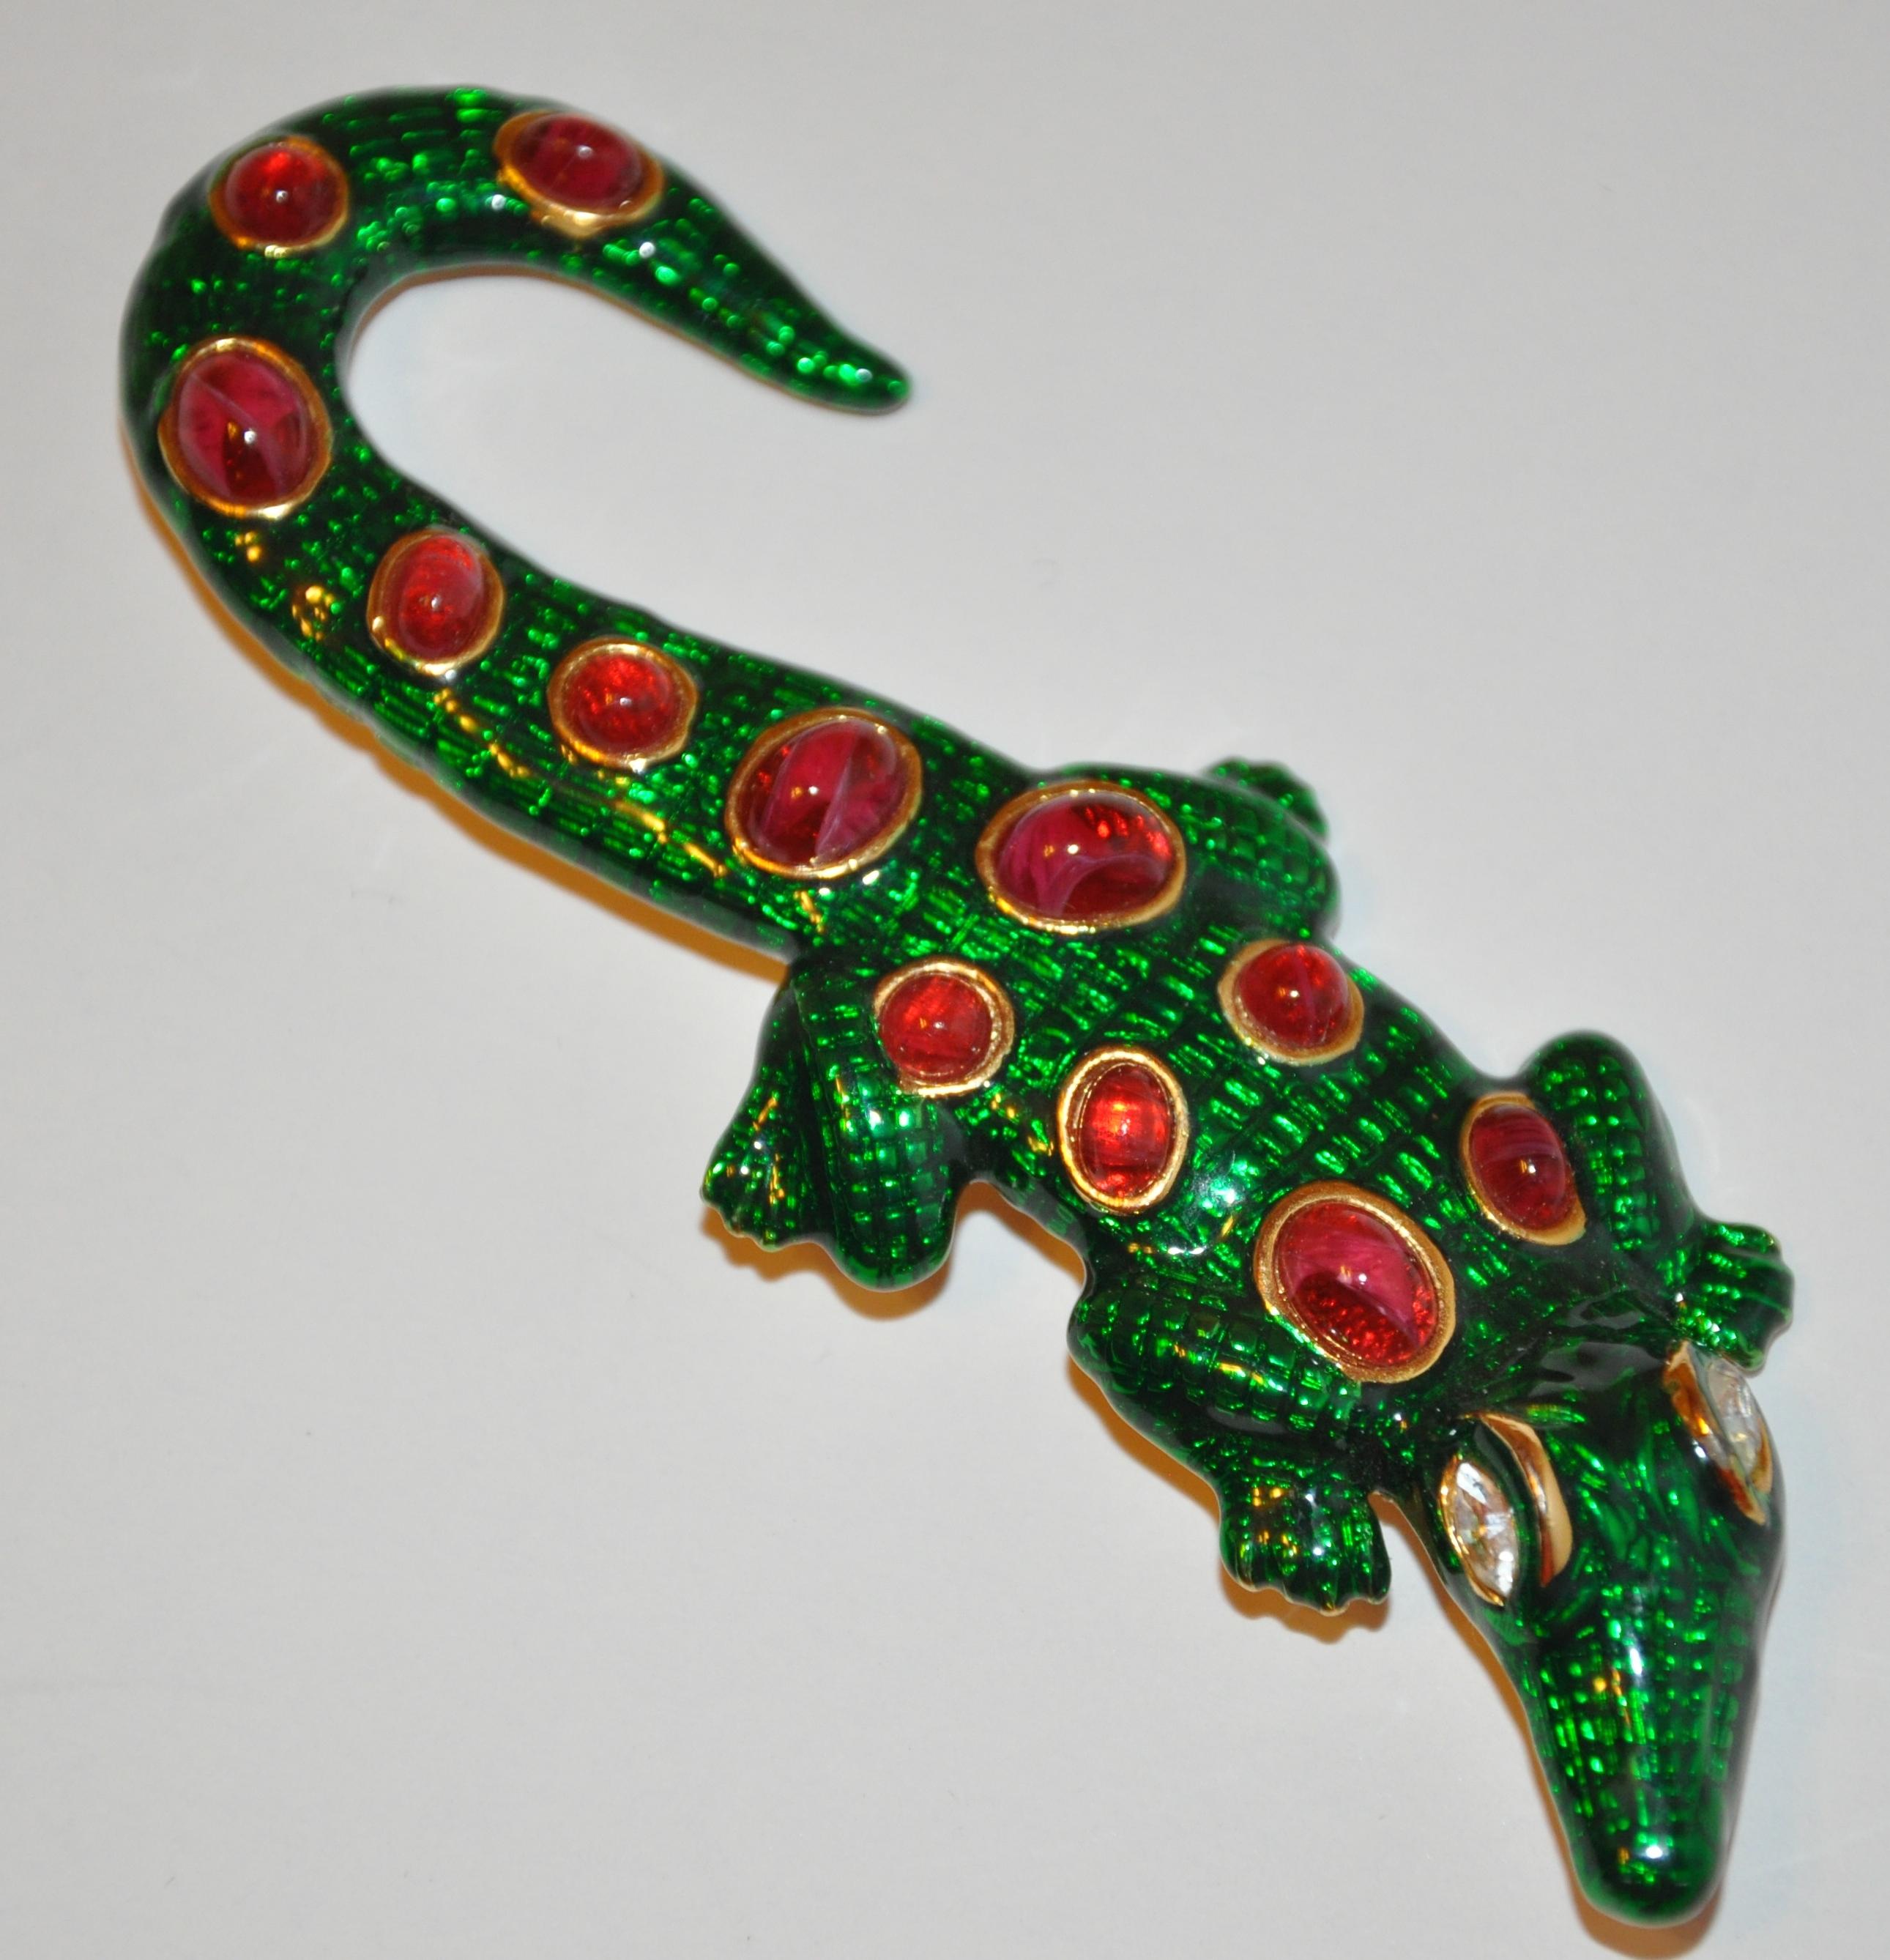 Kenneth Lane Whimsical Green Enamel with Ruby-Like Accent 